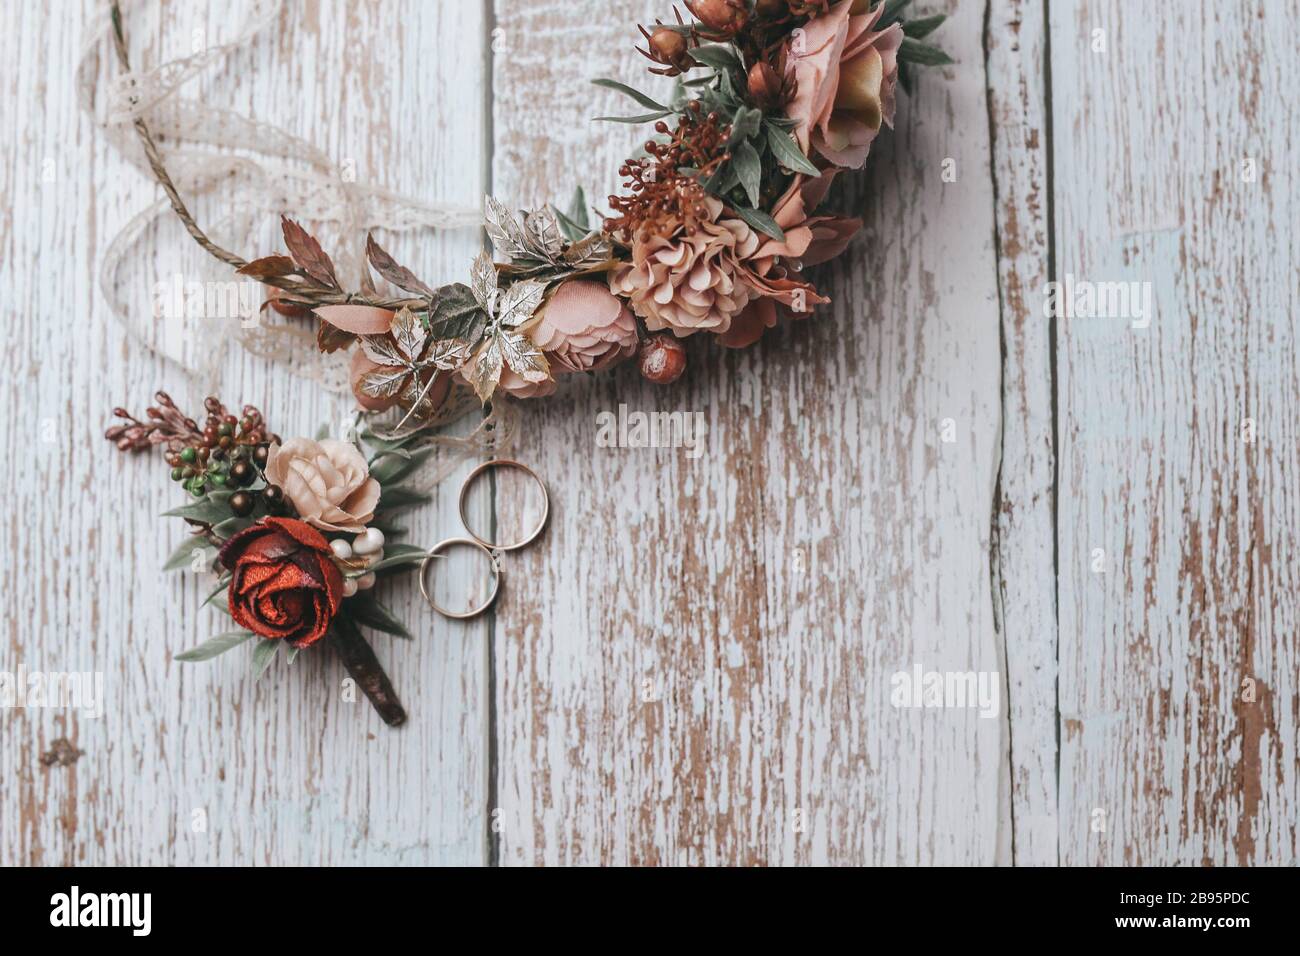 Charming 700+ Rustic Background Wedding Ideas and Templates